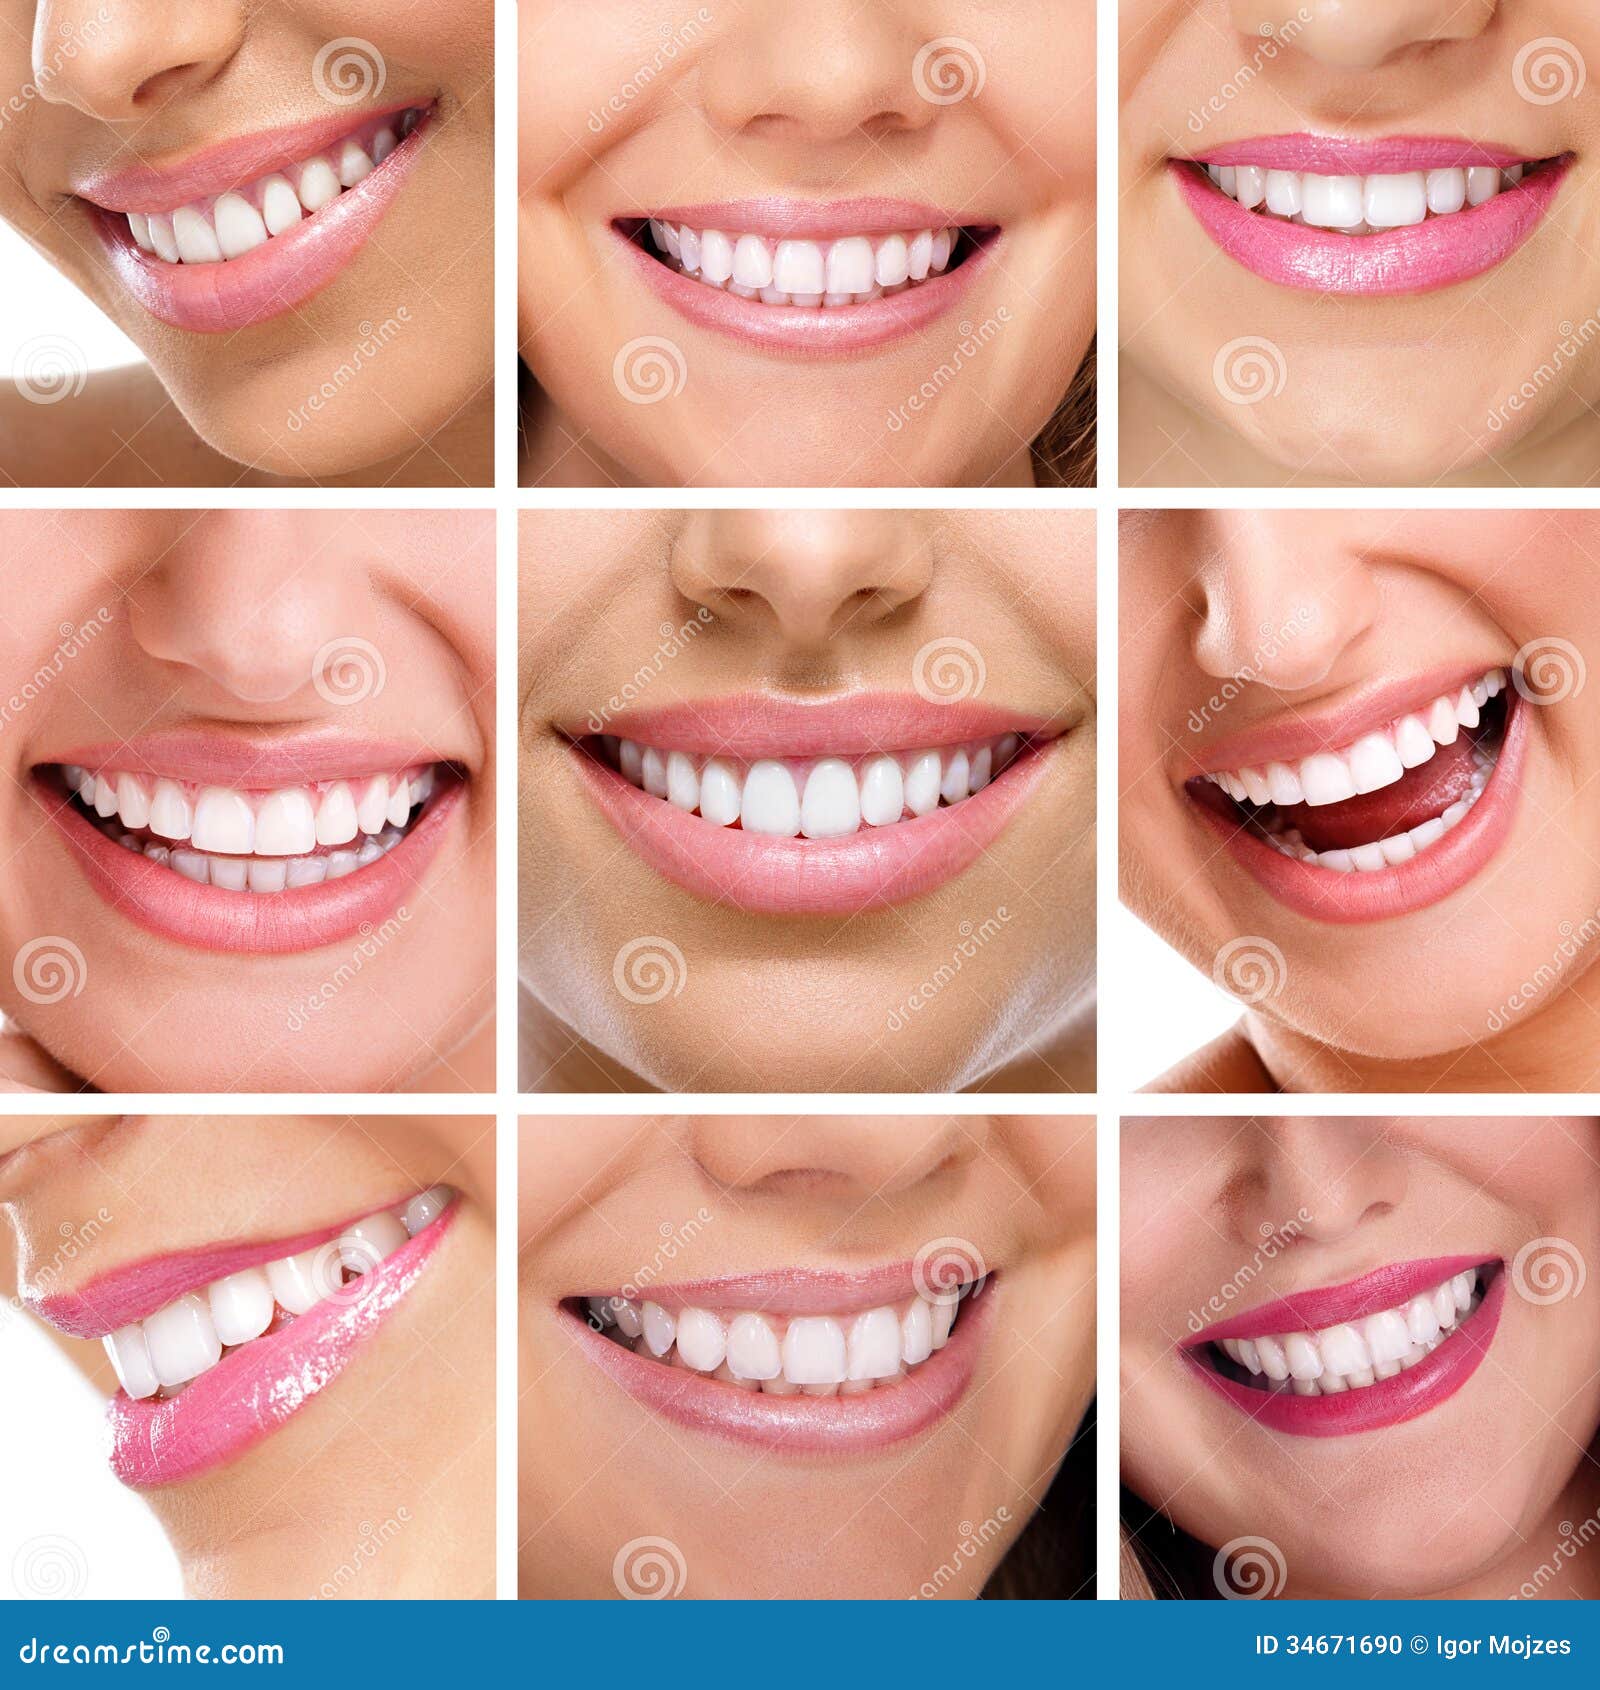 Smiling happy people with healthy teeth. Dental health. Collage.